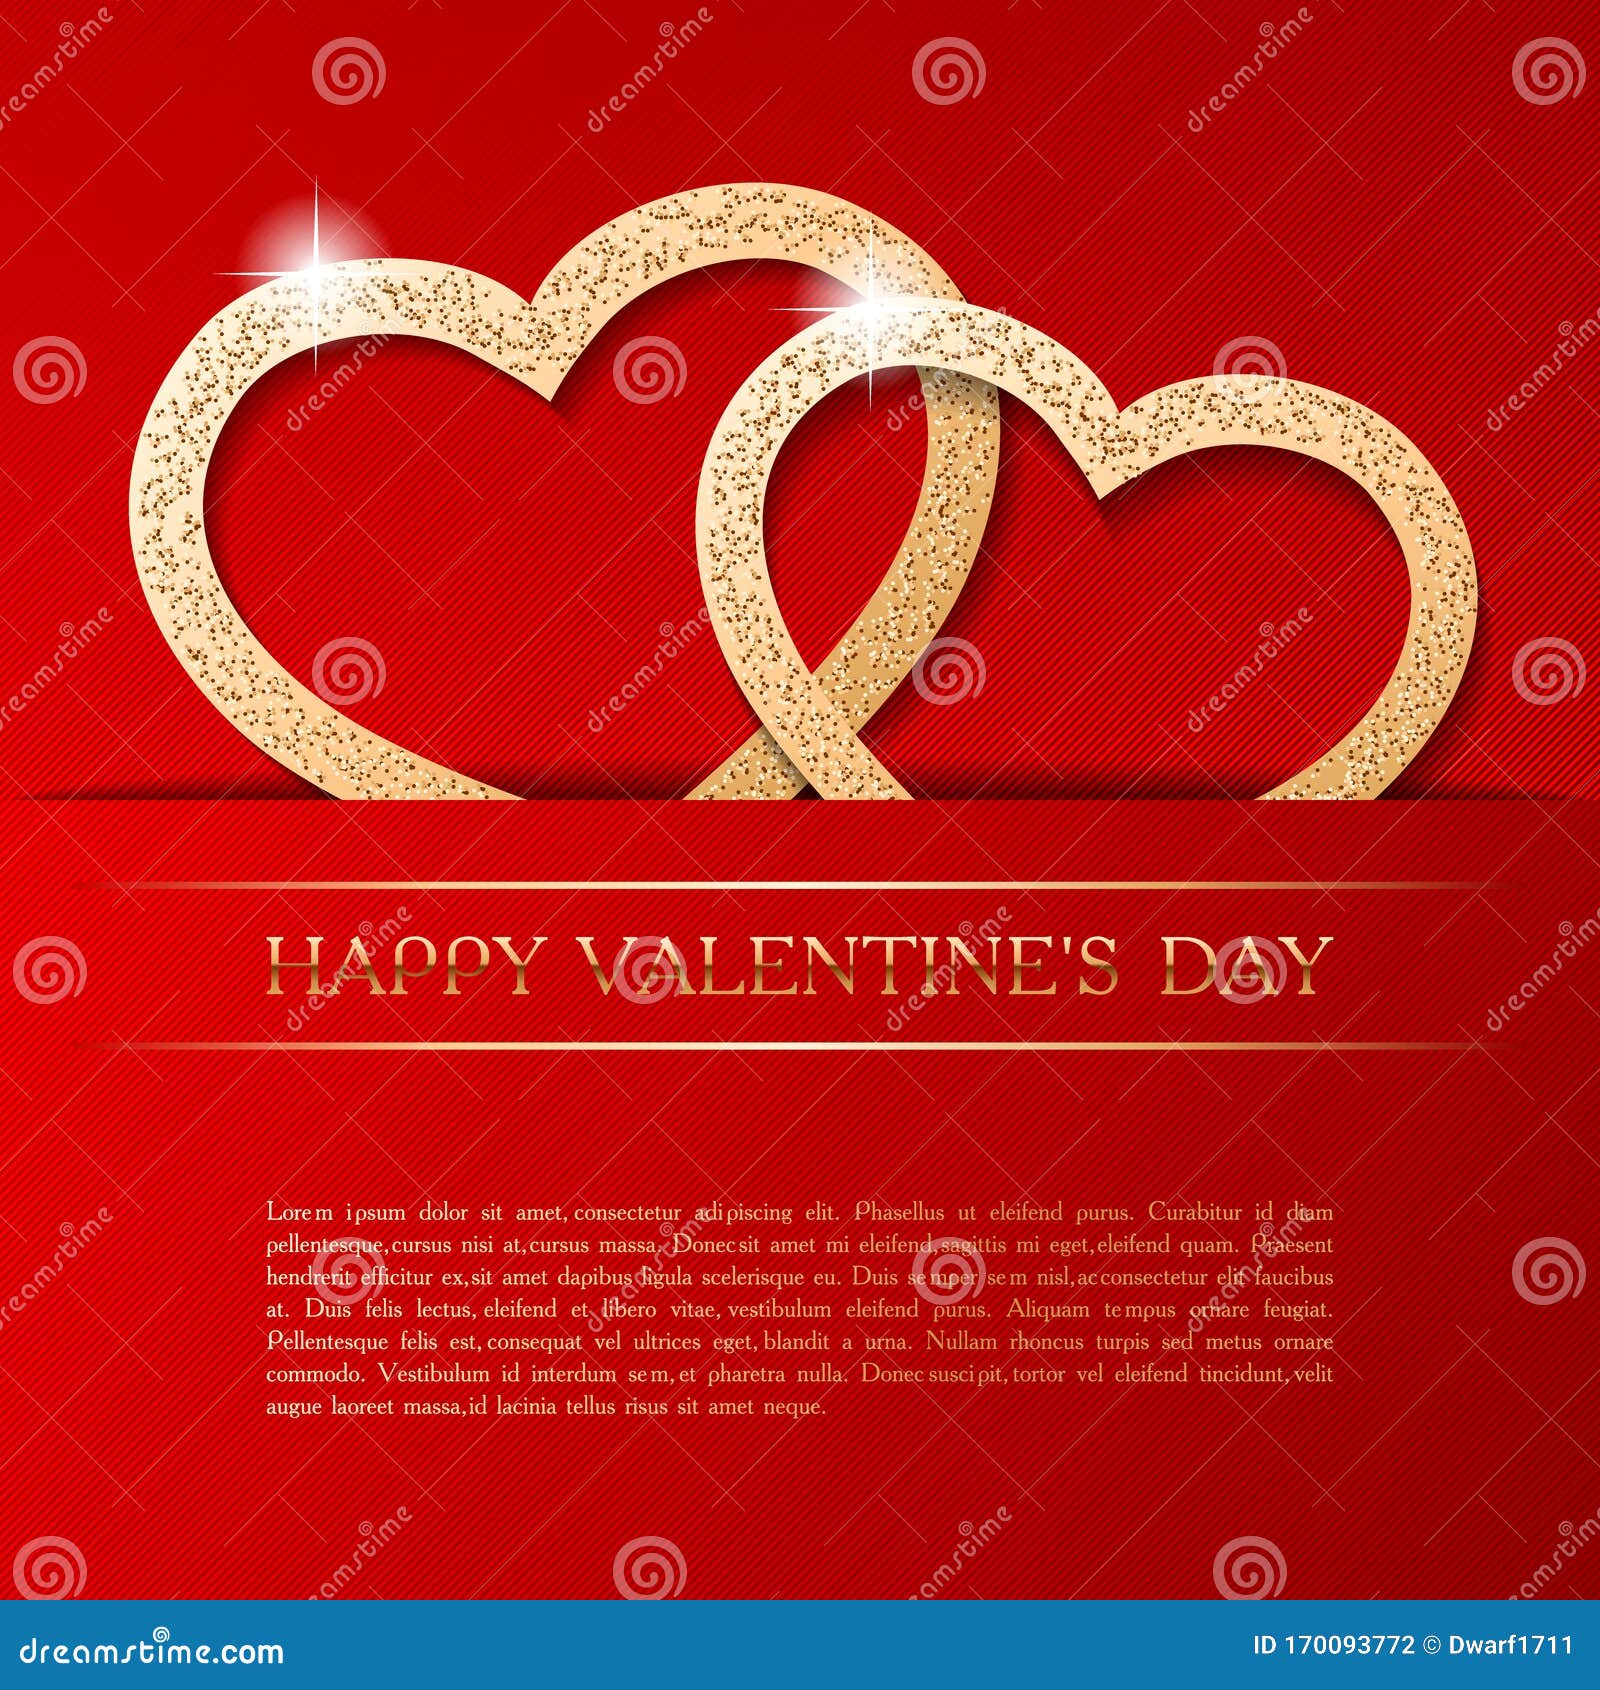 Couple of golden hearts on red striped background. Happy Velentines Day golden text. Cute card, banner, flyer, poster, voucher, greeting card, social network post vector template. 